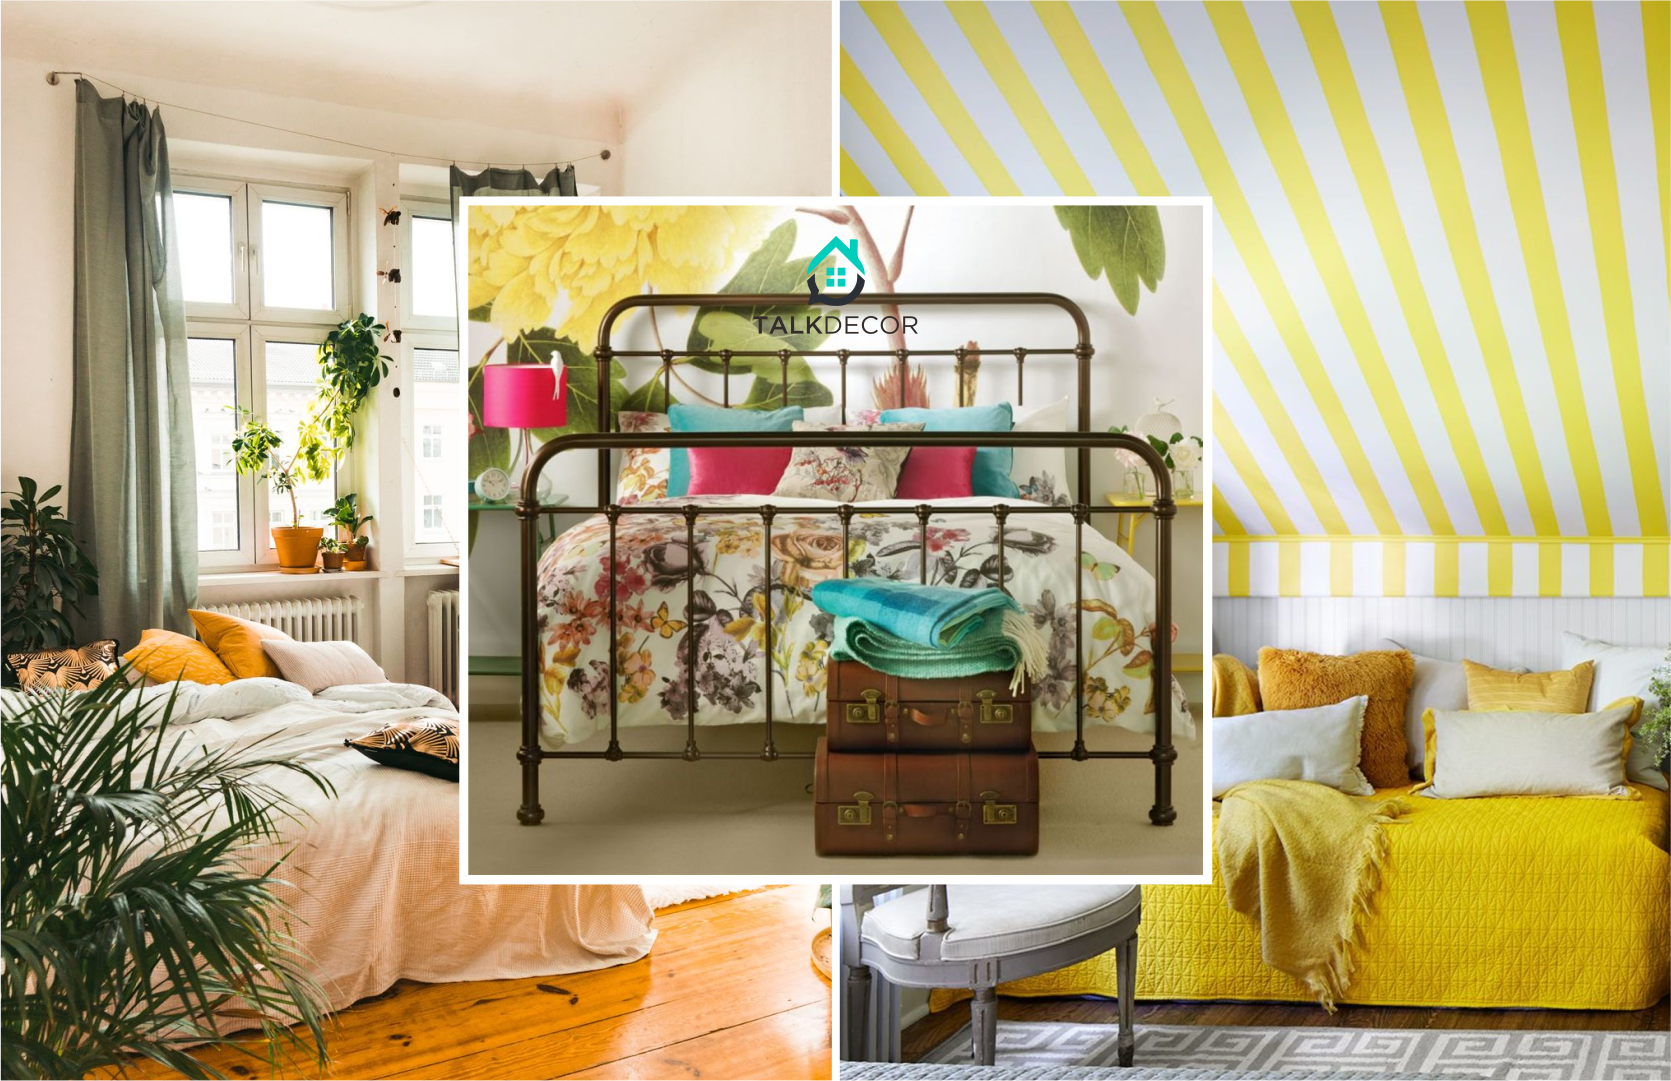 Brighten Up Room with Colorful Decoration Ideas for a Small Bedroom